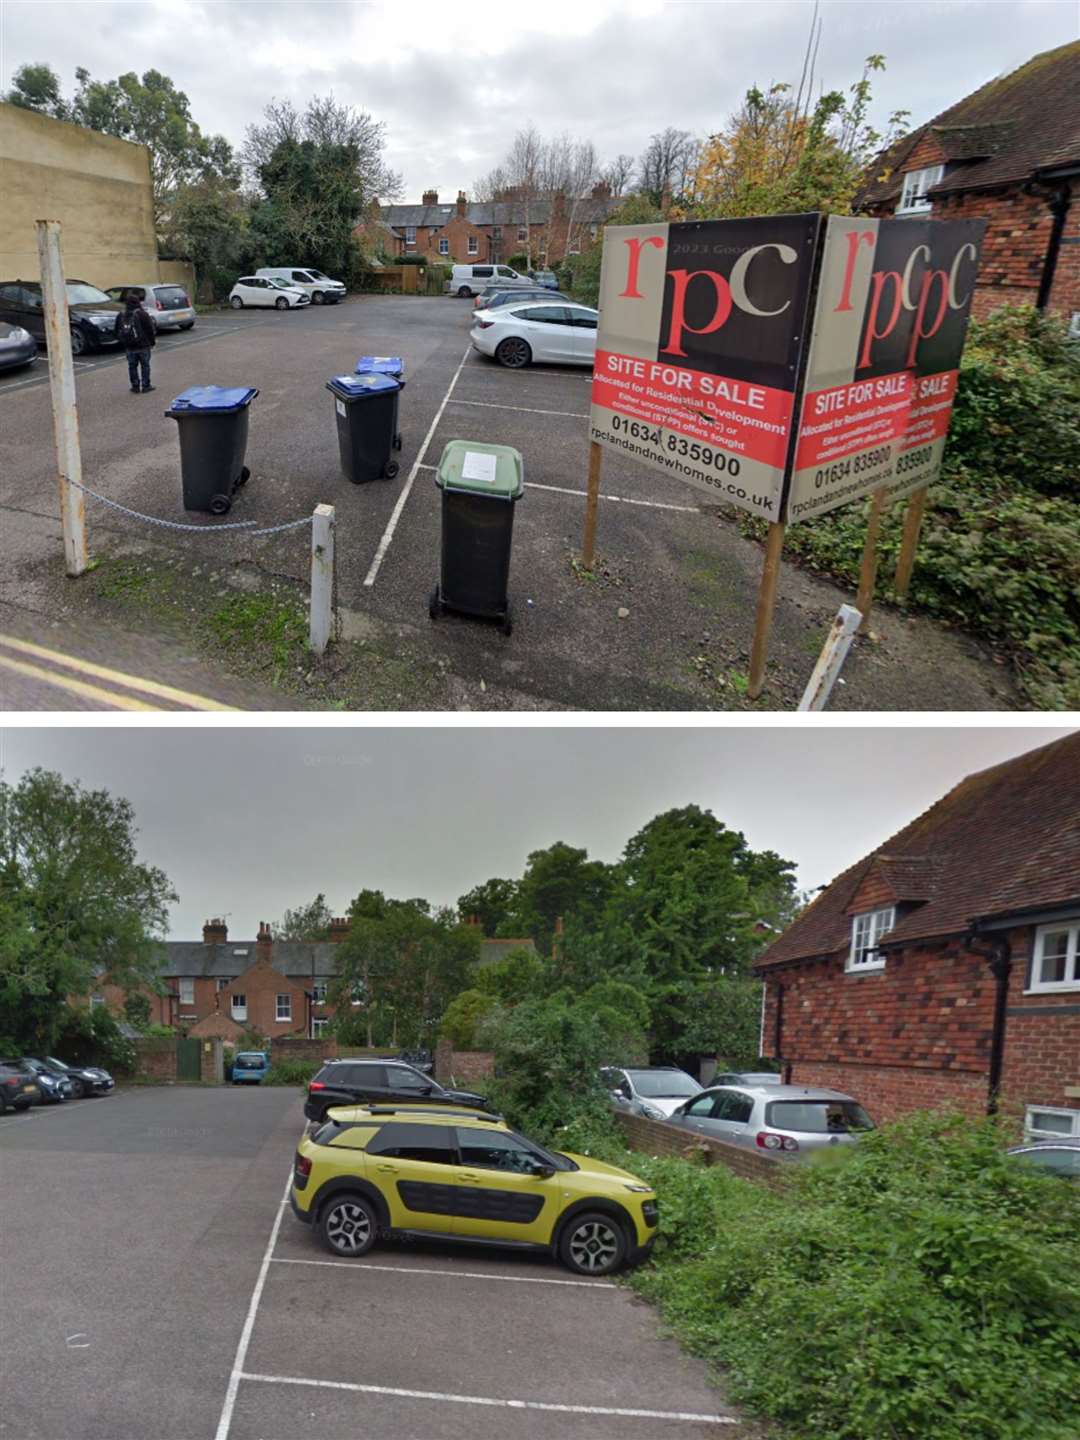 St John's Lane business car park today (top) and as it was in 2019. Picture: Google